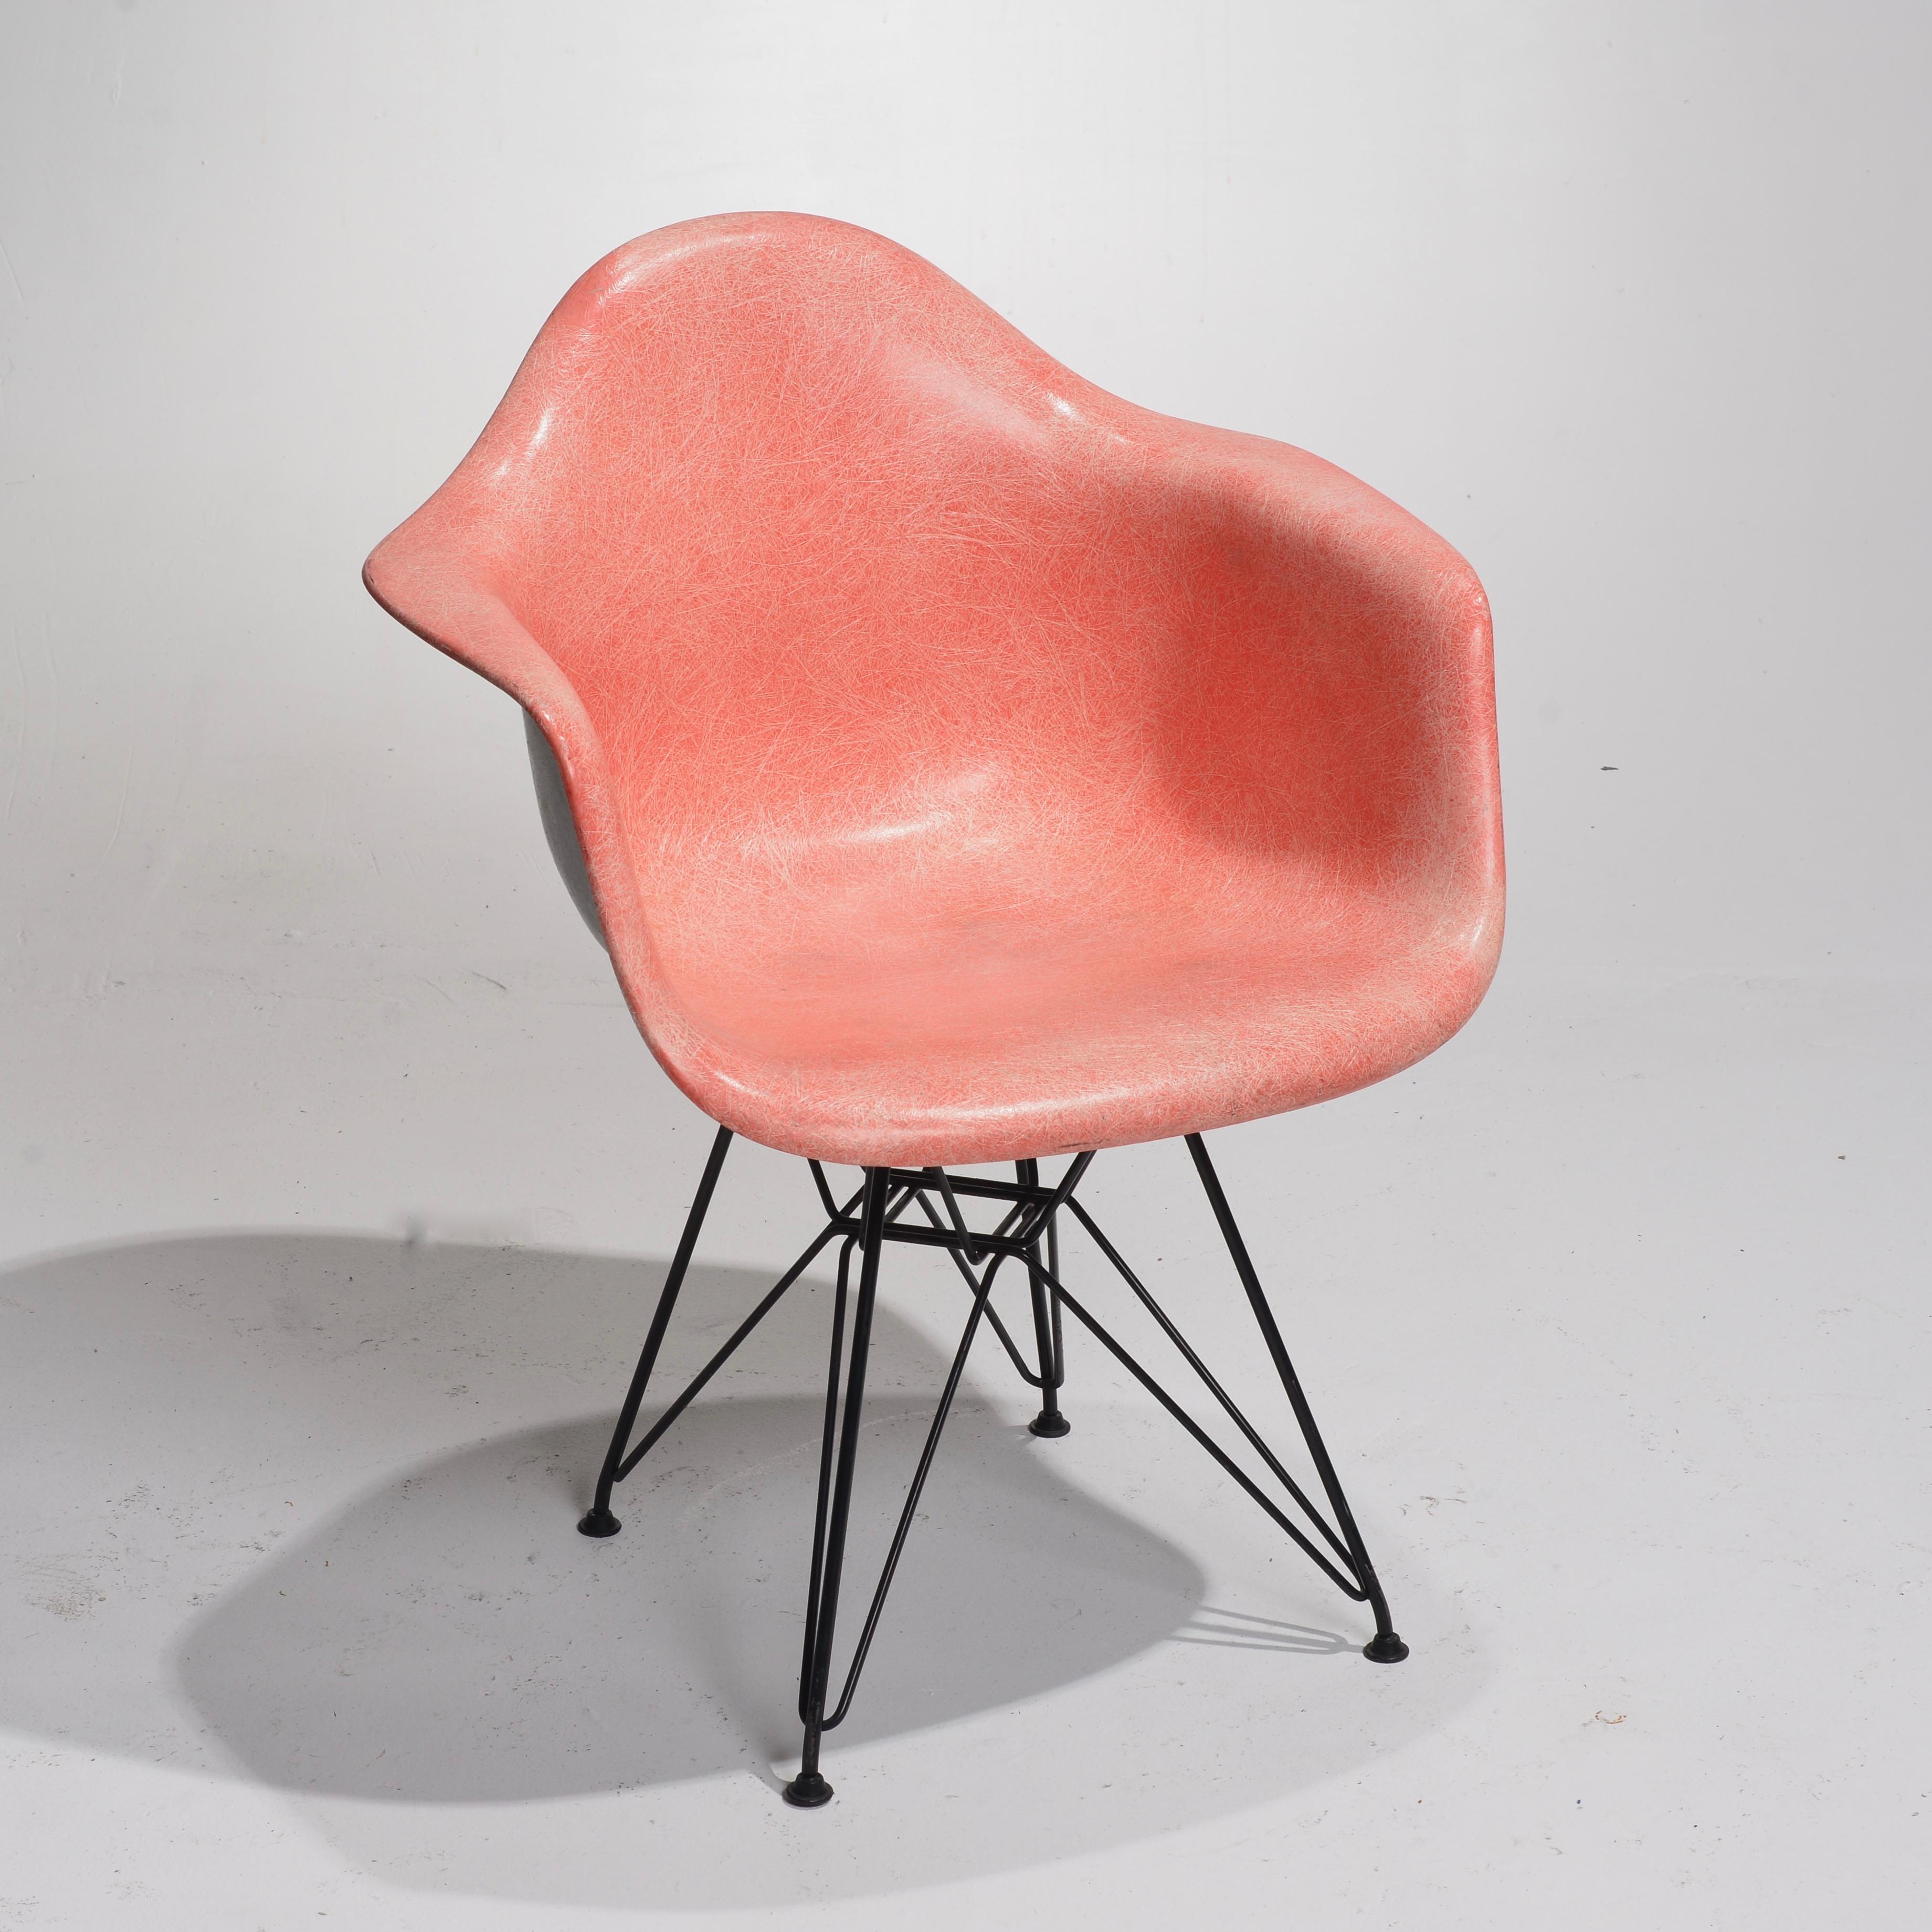 Zenith Charles Eames DAR Fiberglass Shell Chairs For Sale 2